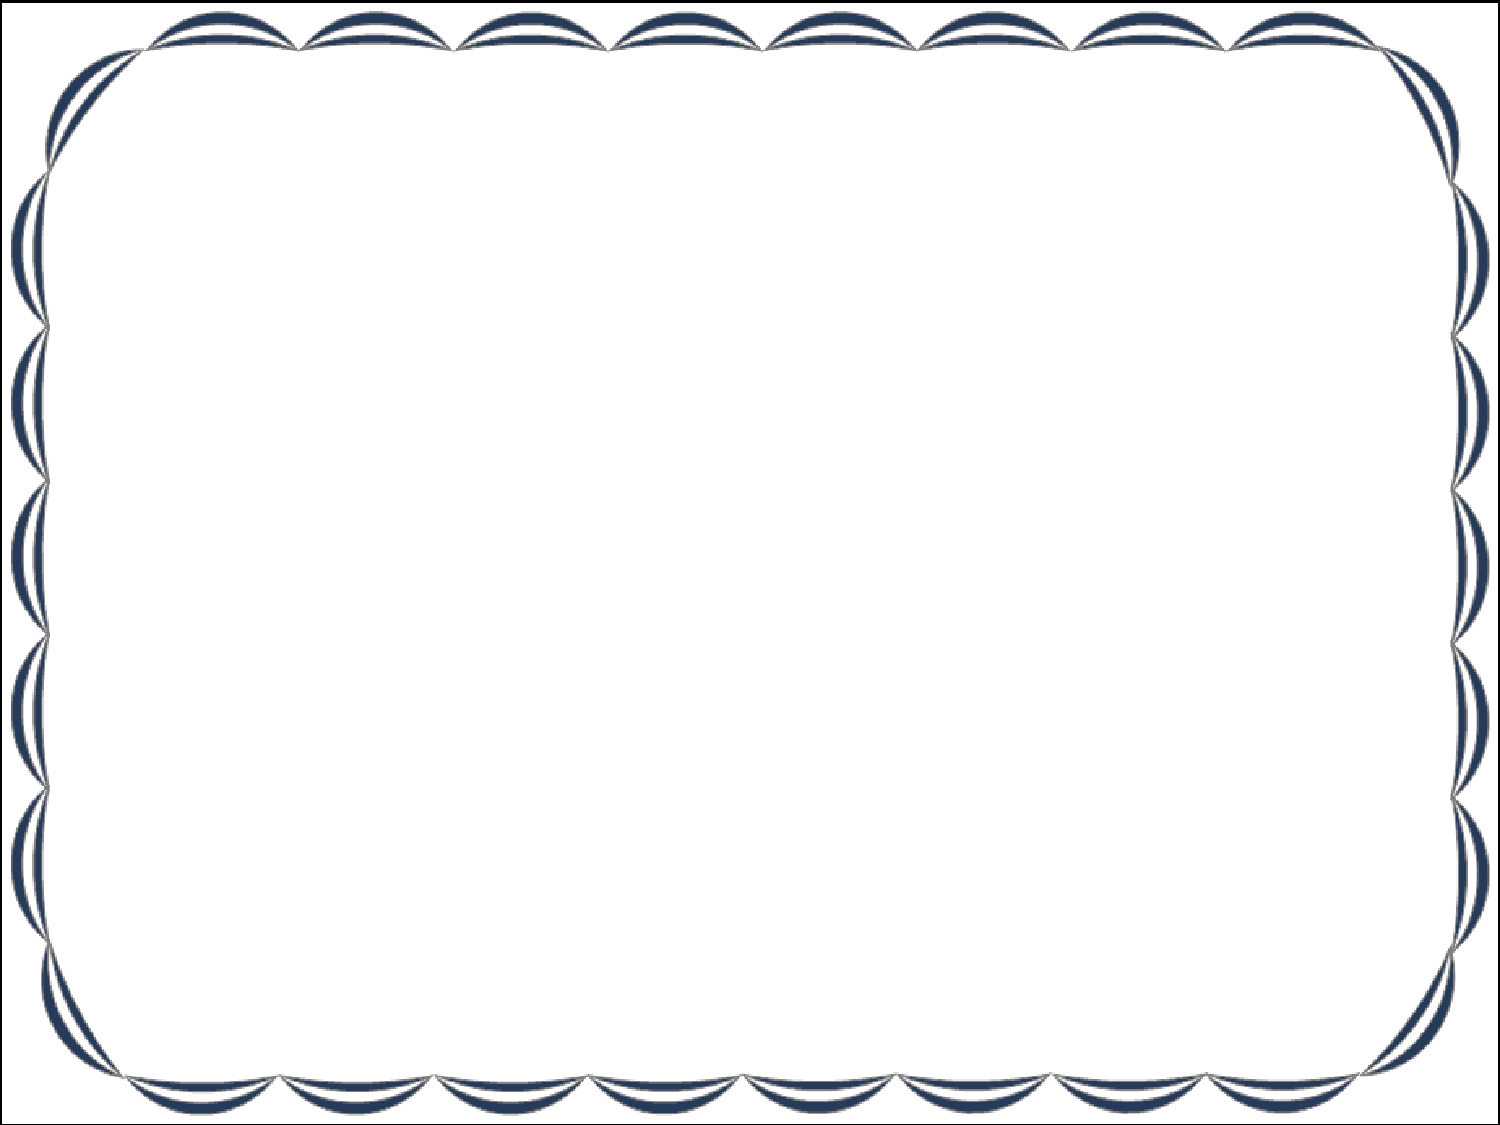 Free Word Certificate Borders Templates